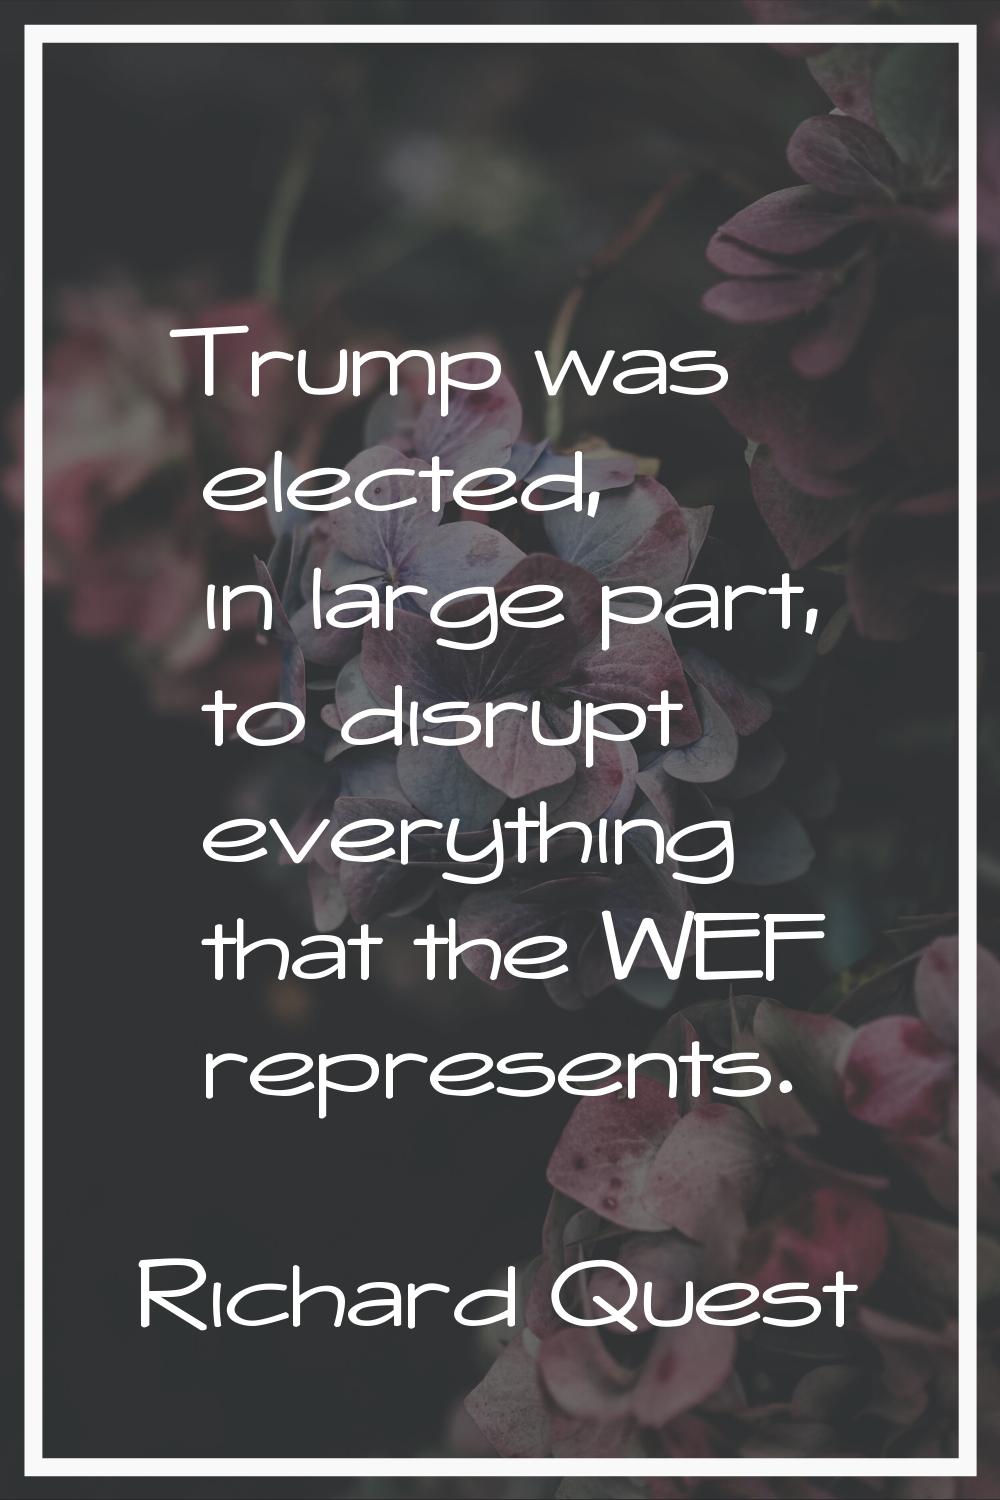 Trump was elected, in large part, to disrupt everything that the WEF represents.